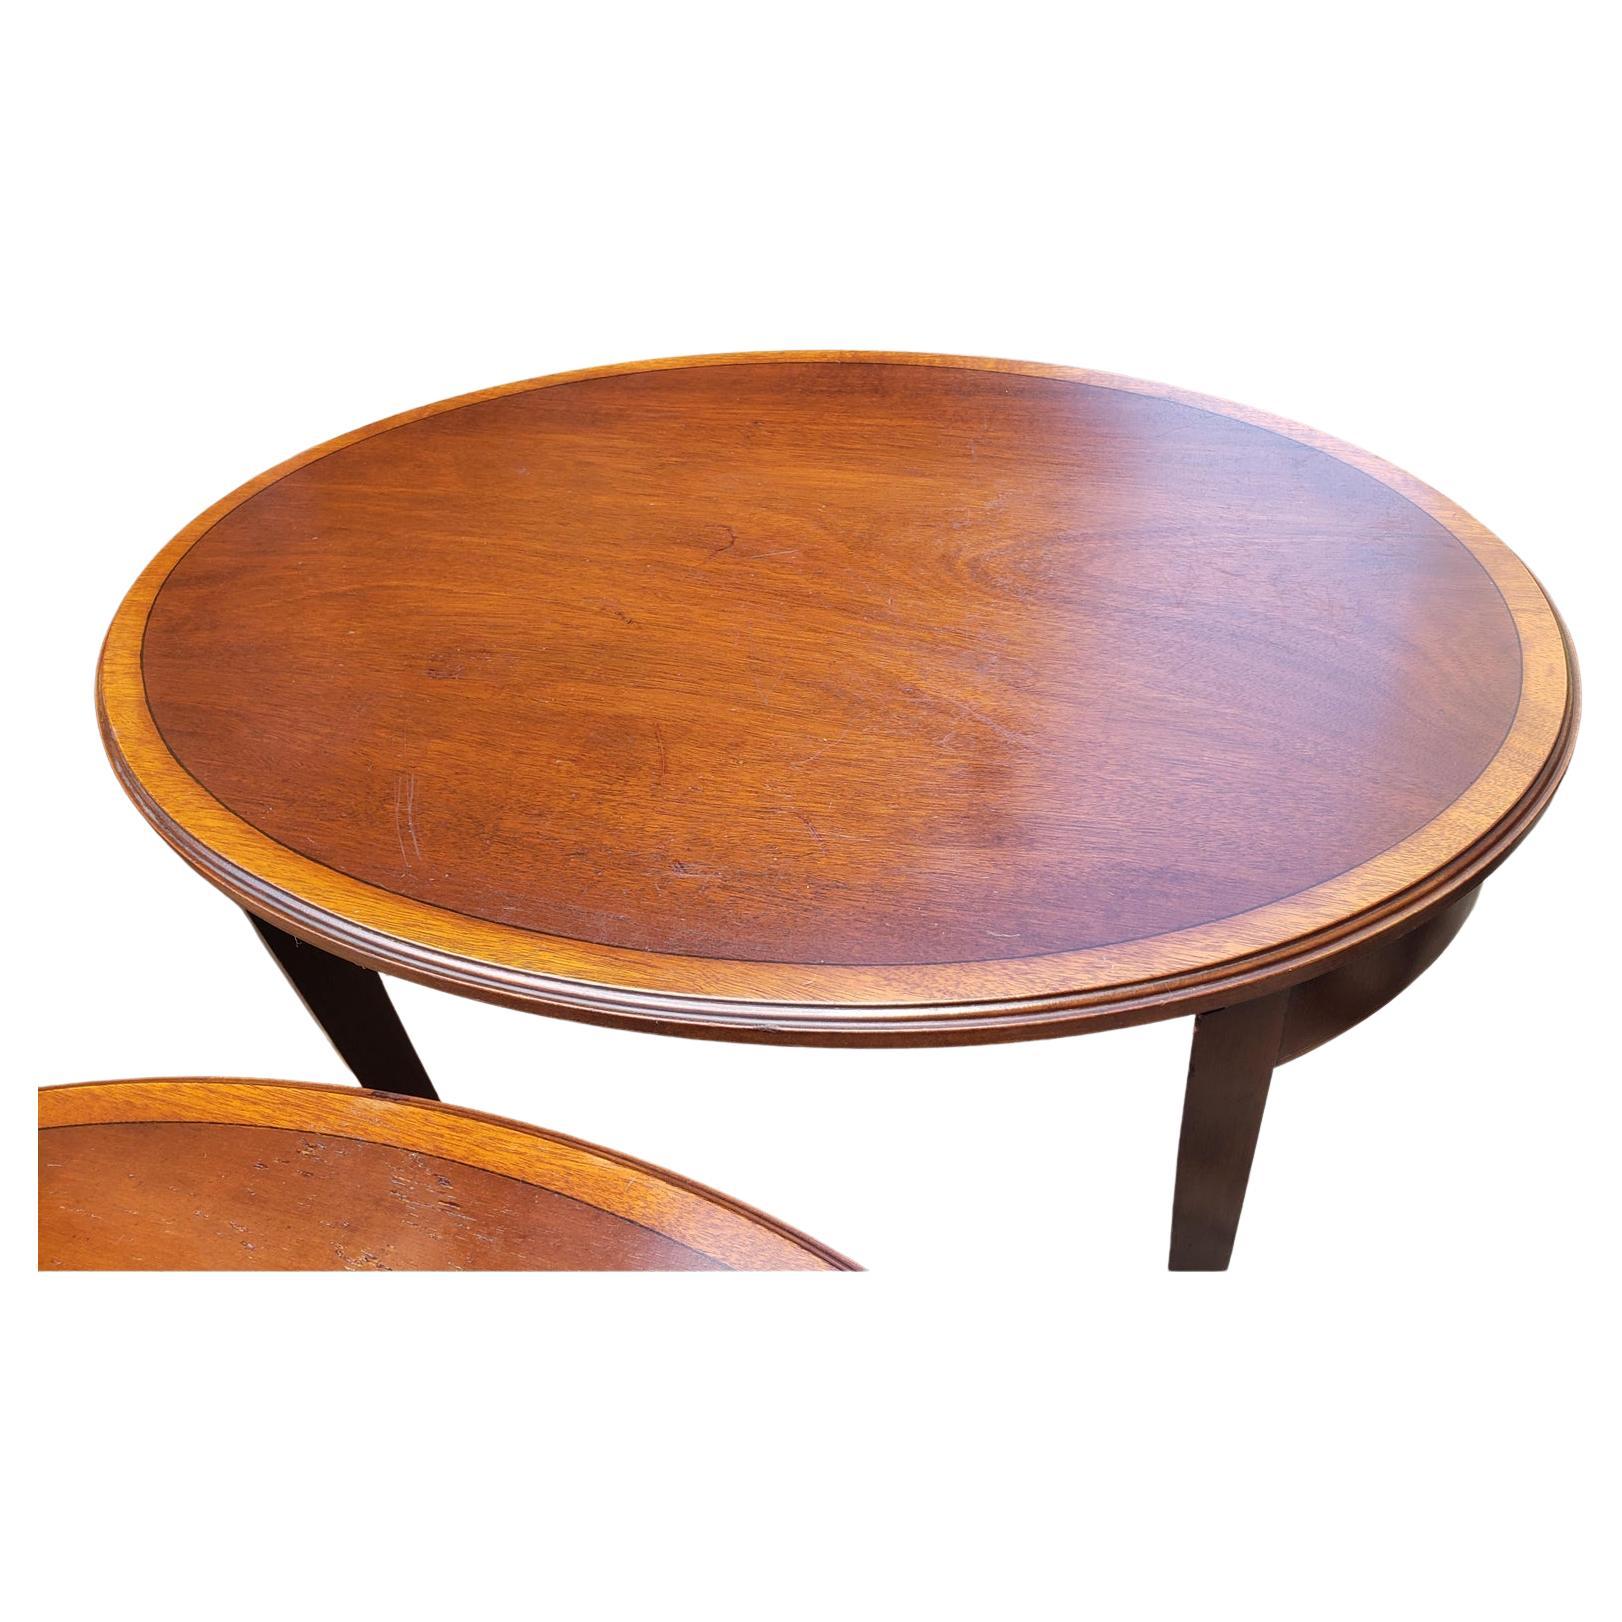 Late 20th Century 1970s Hekman Mid-Century Modern Oval Nesting Tables, Set of 3